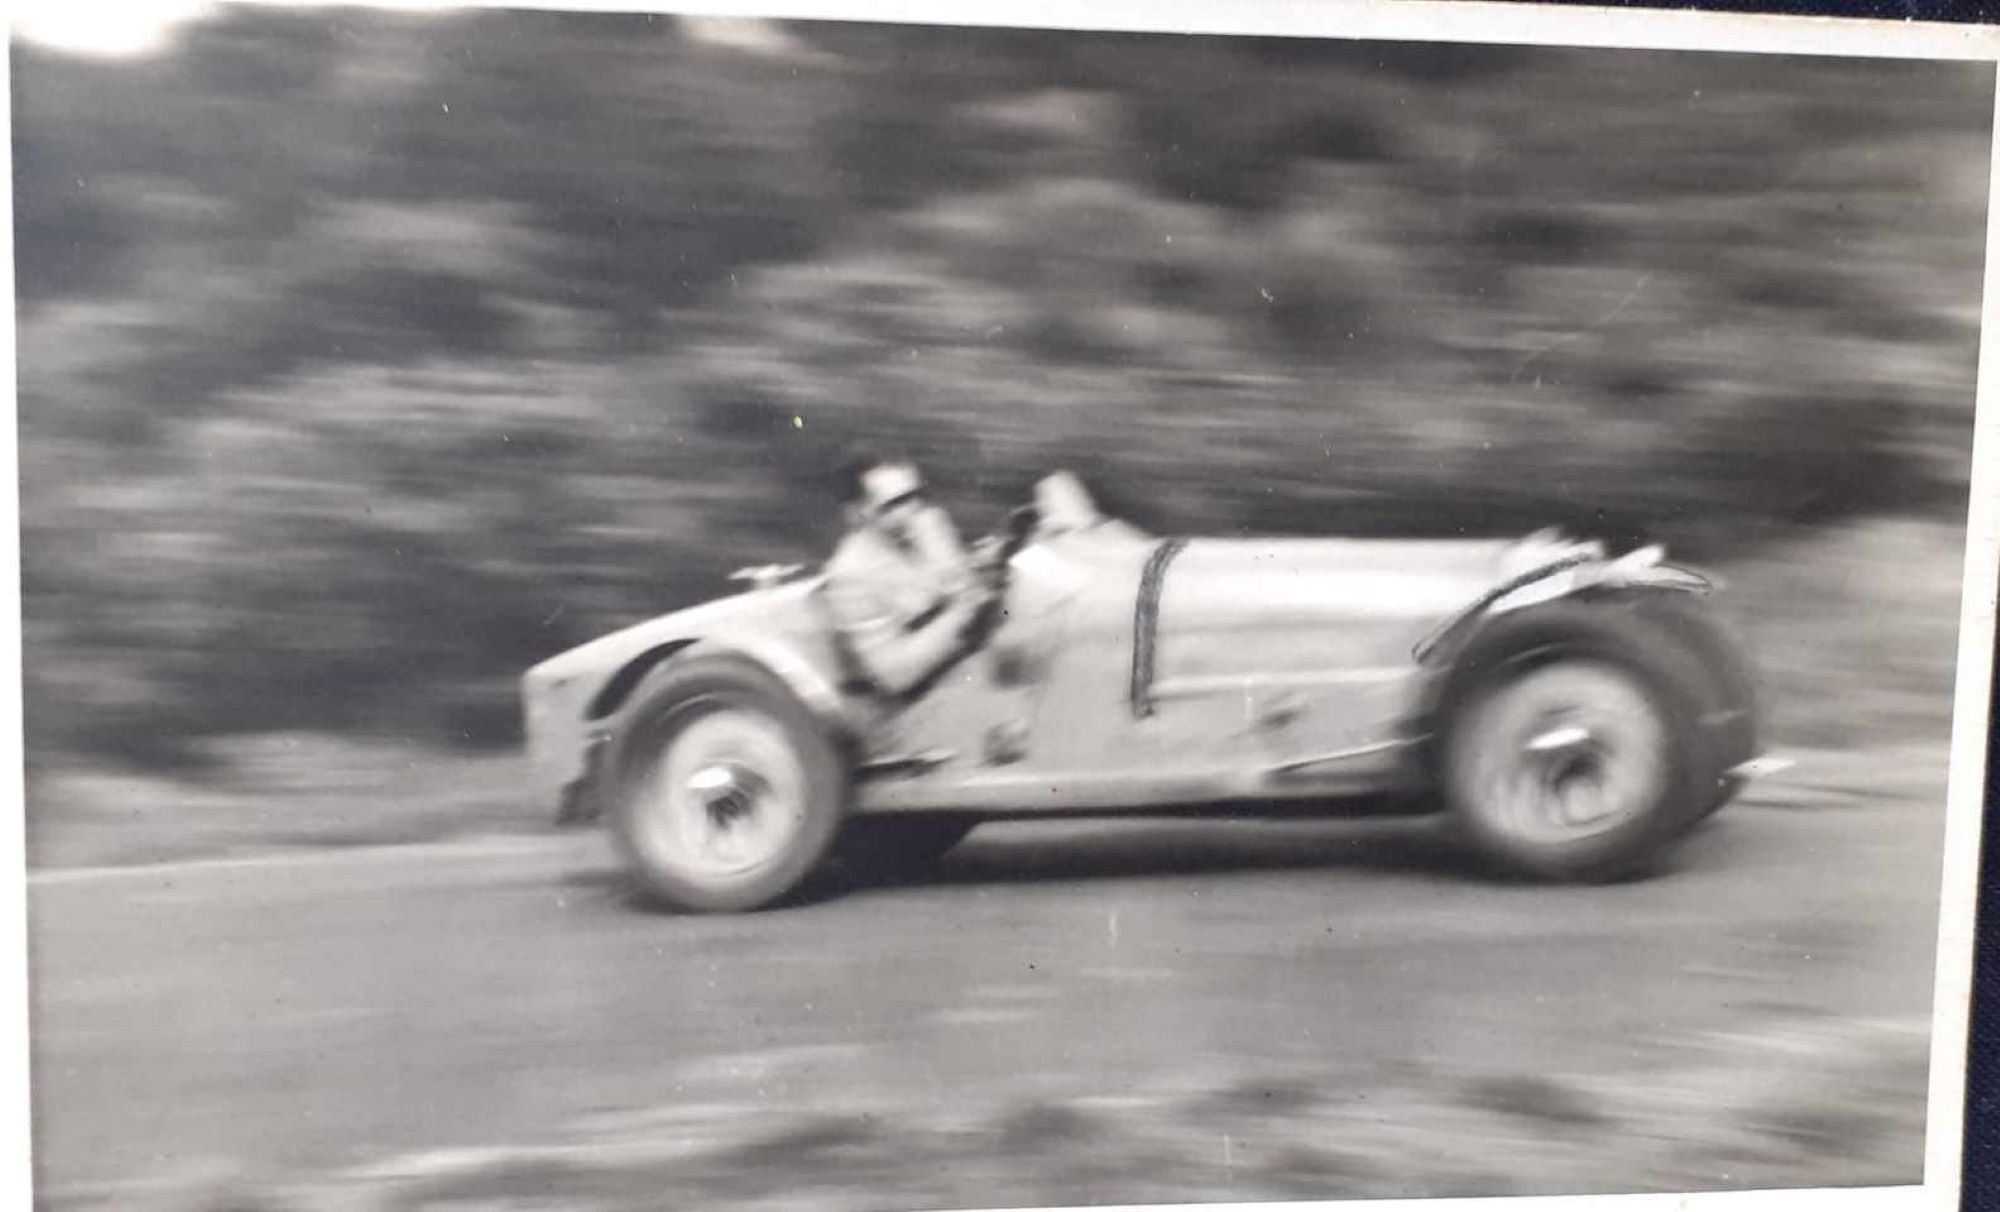 Name:  NSCC 1950 #0116 Bugatti T35 at speed - light colour 1950's - image Graeme Wells arch Anthony Wel.jpg
Views: 165
Size:  158.1 KB